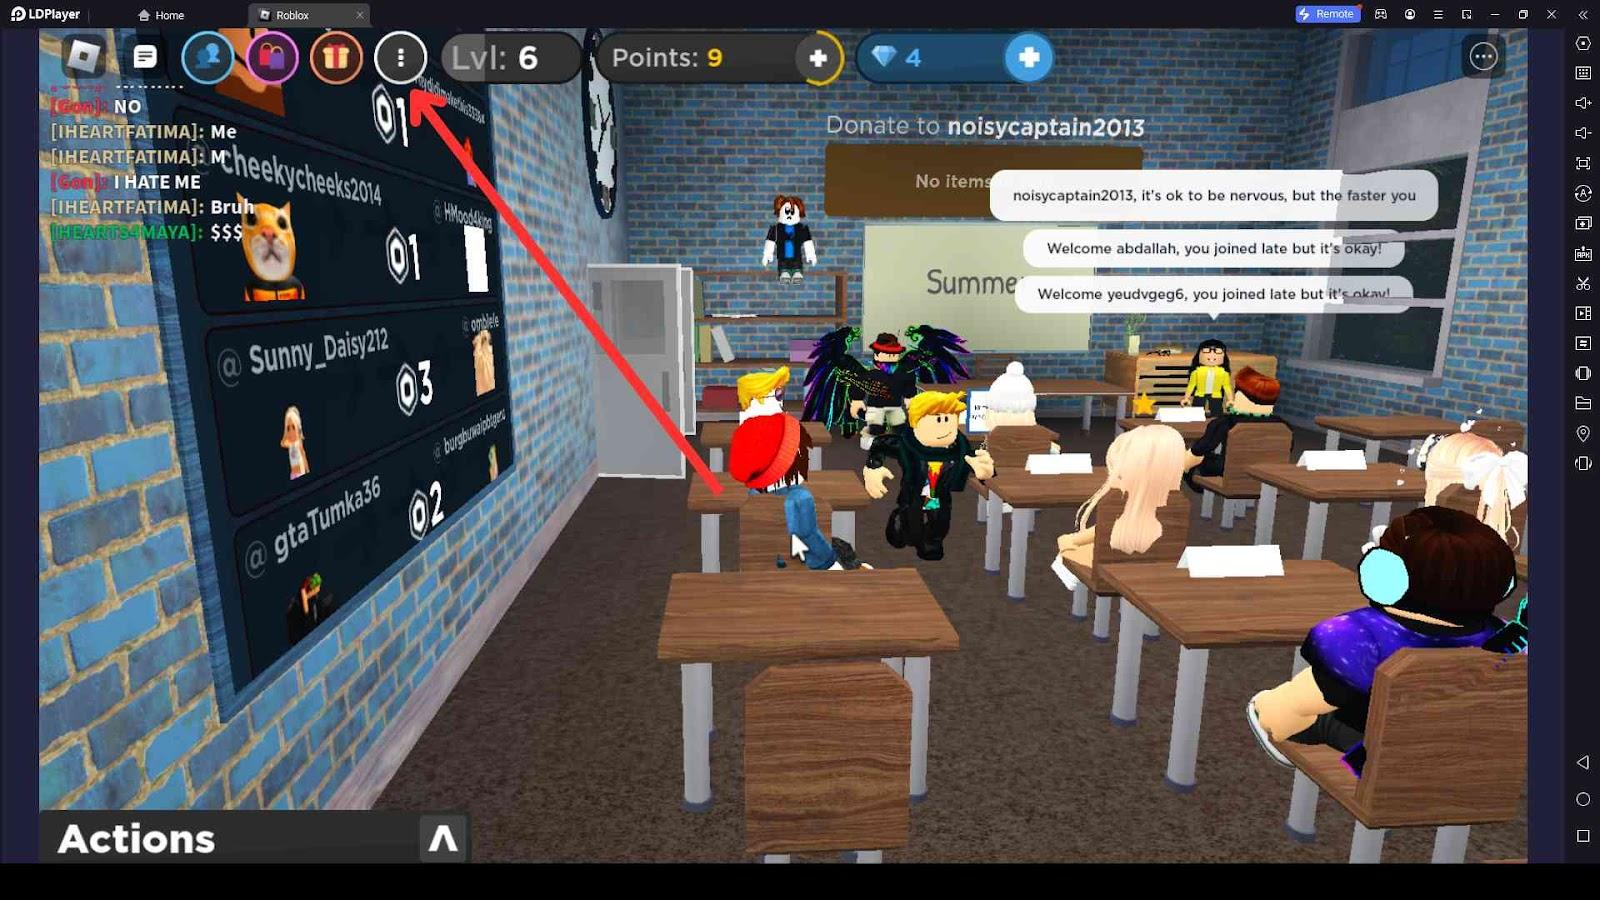 Roblox The Presentation Experience codes (July 2022): Free rewards